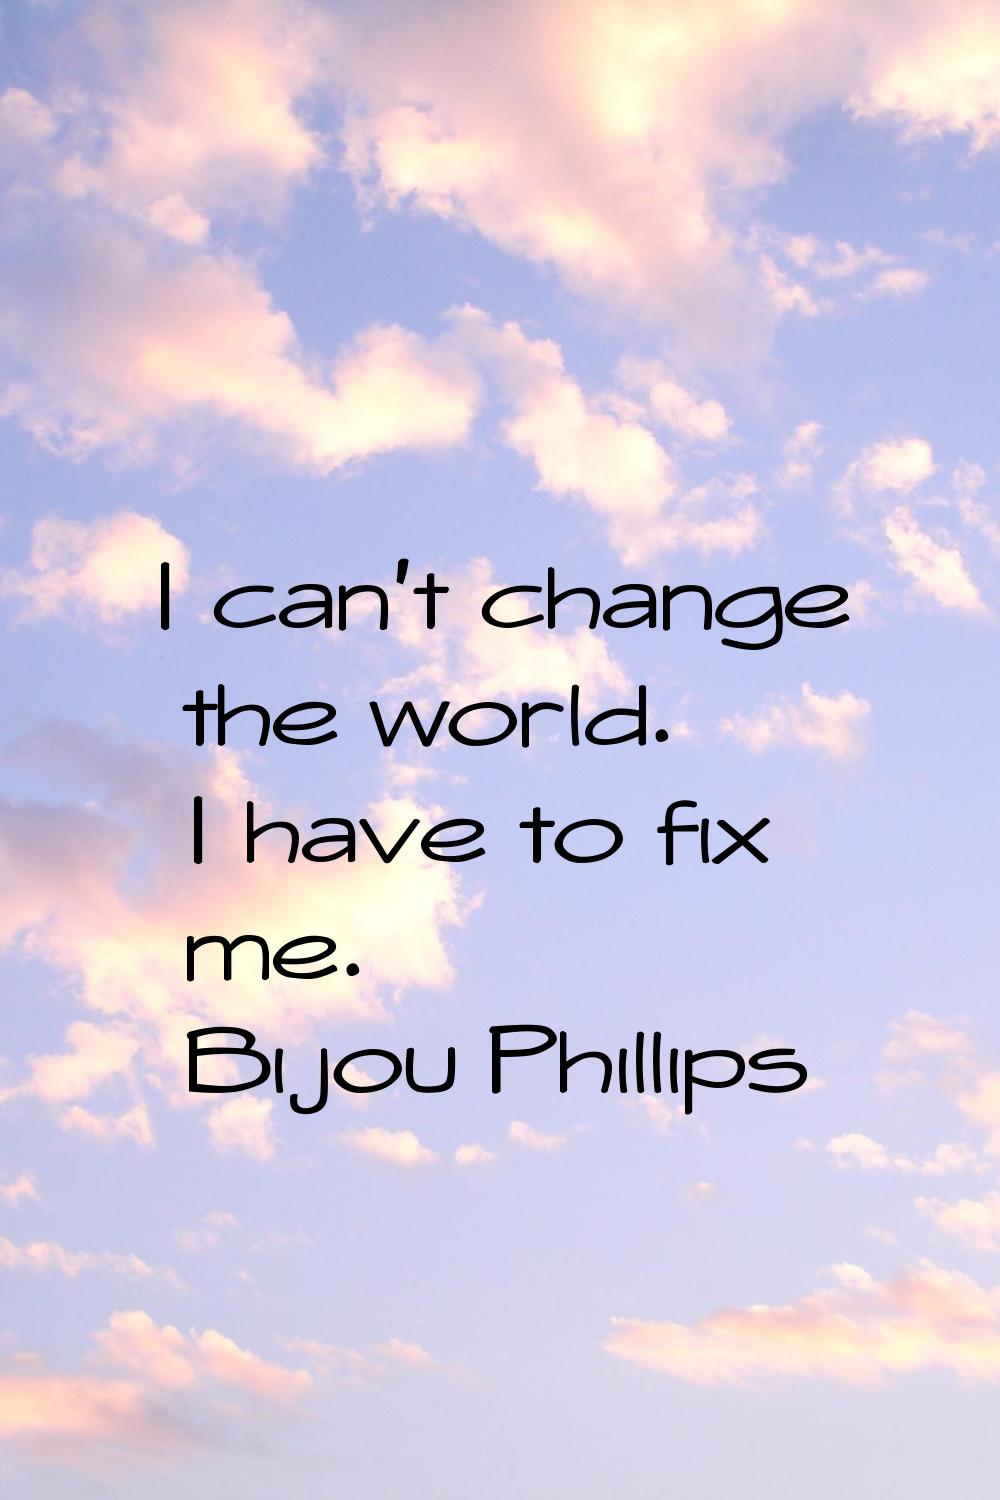 I can't change the world. I have to fix me.